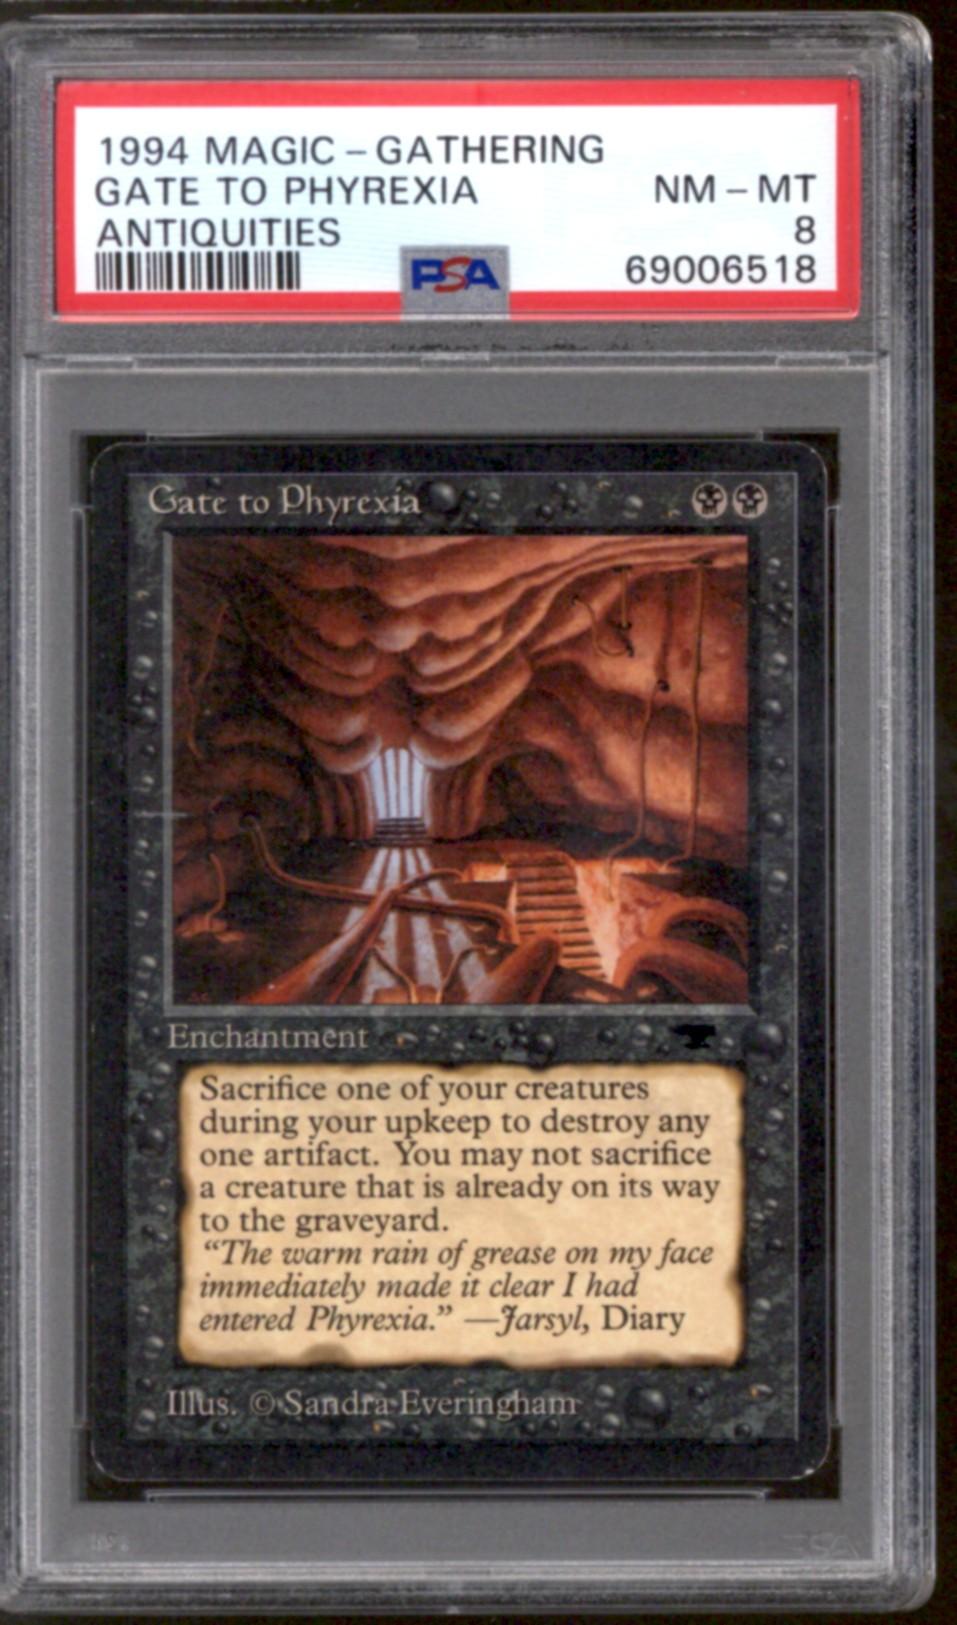 Magic the Gathering Antiquities Gate To Phyrexia PSA 8